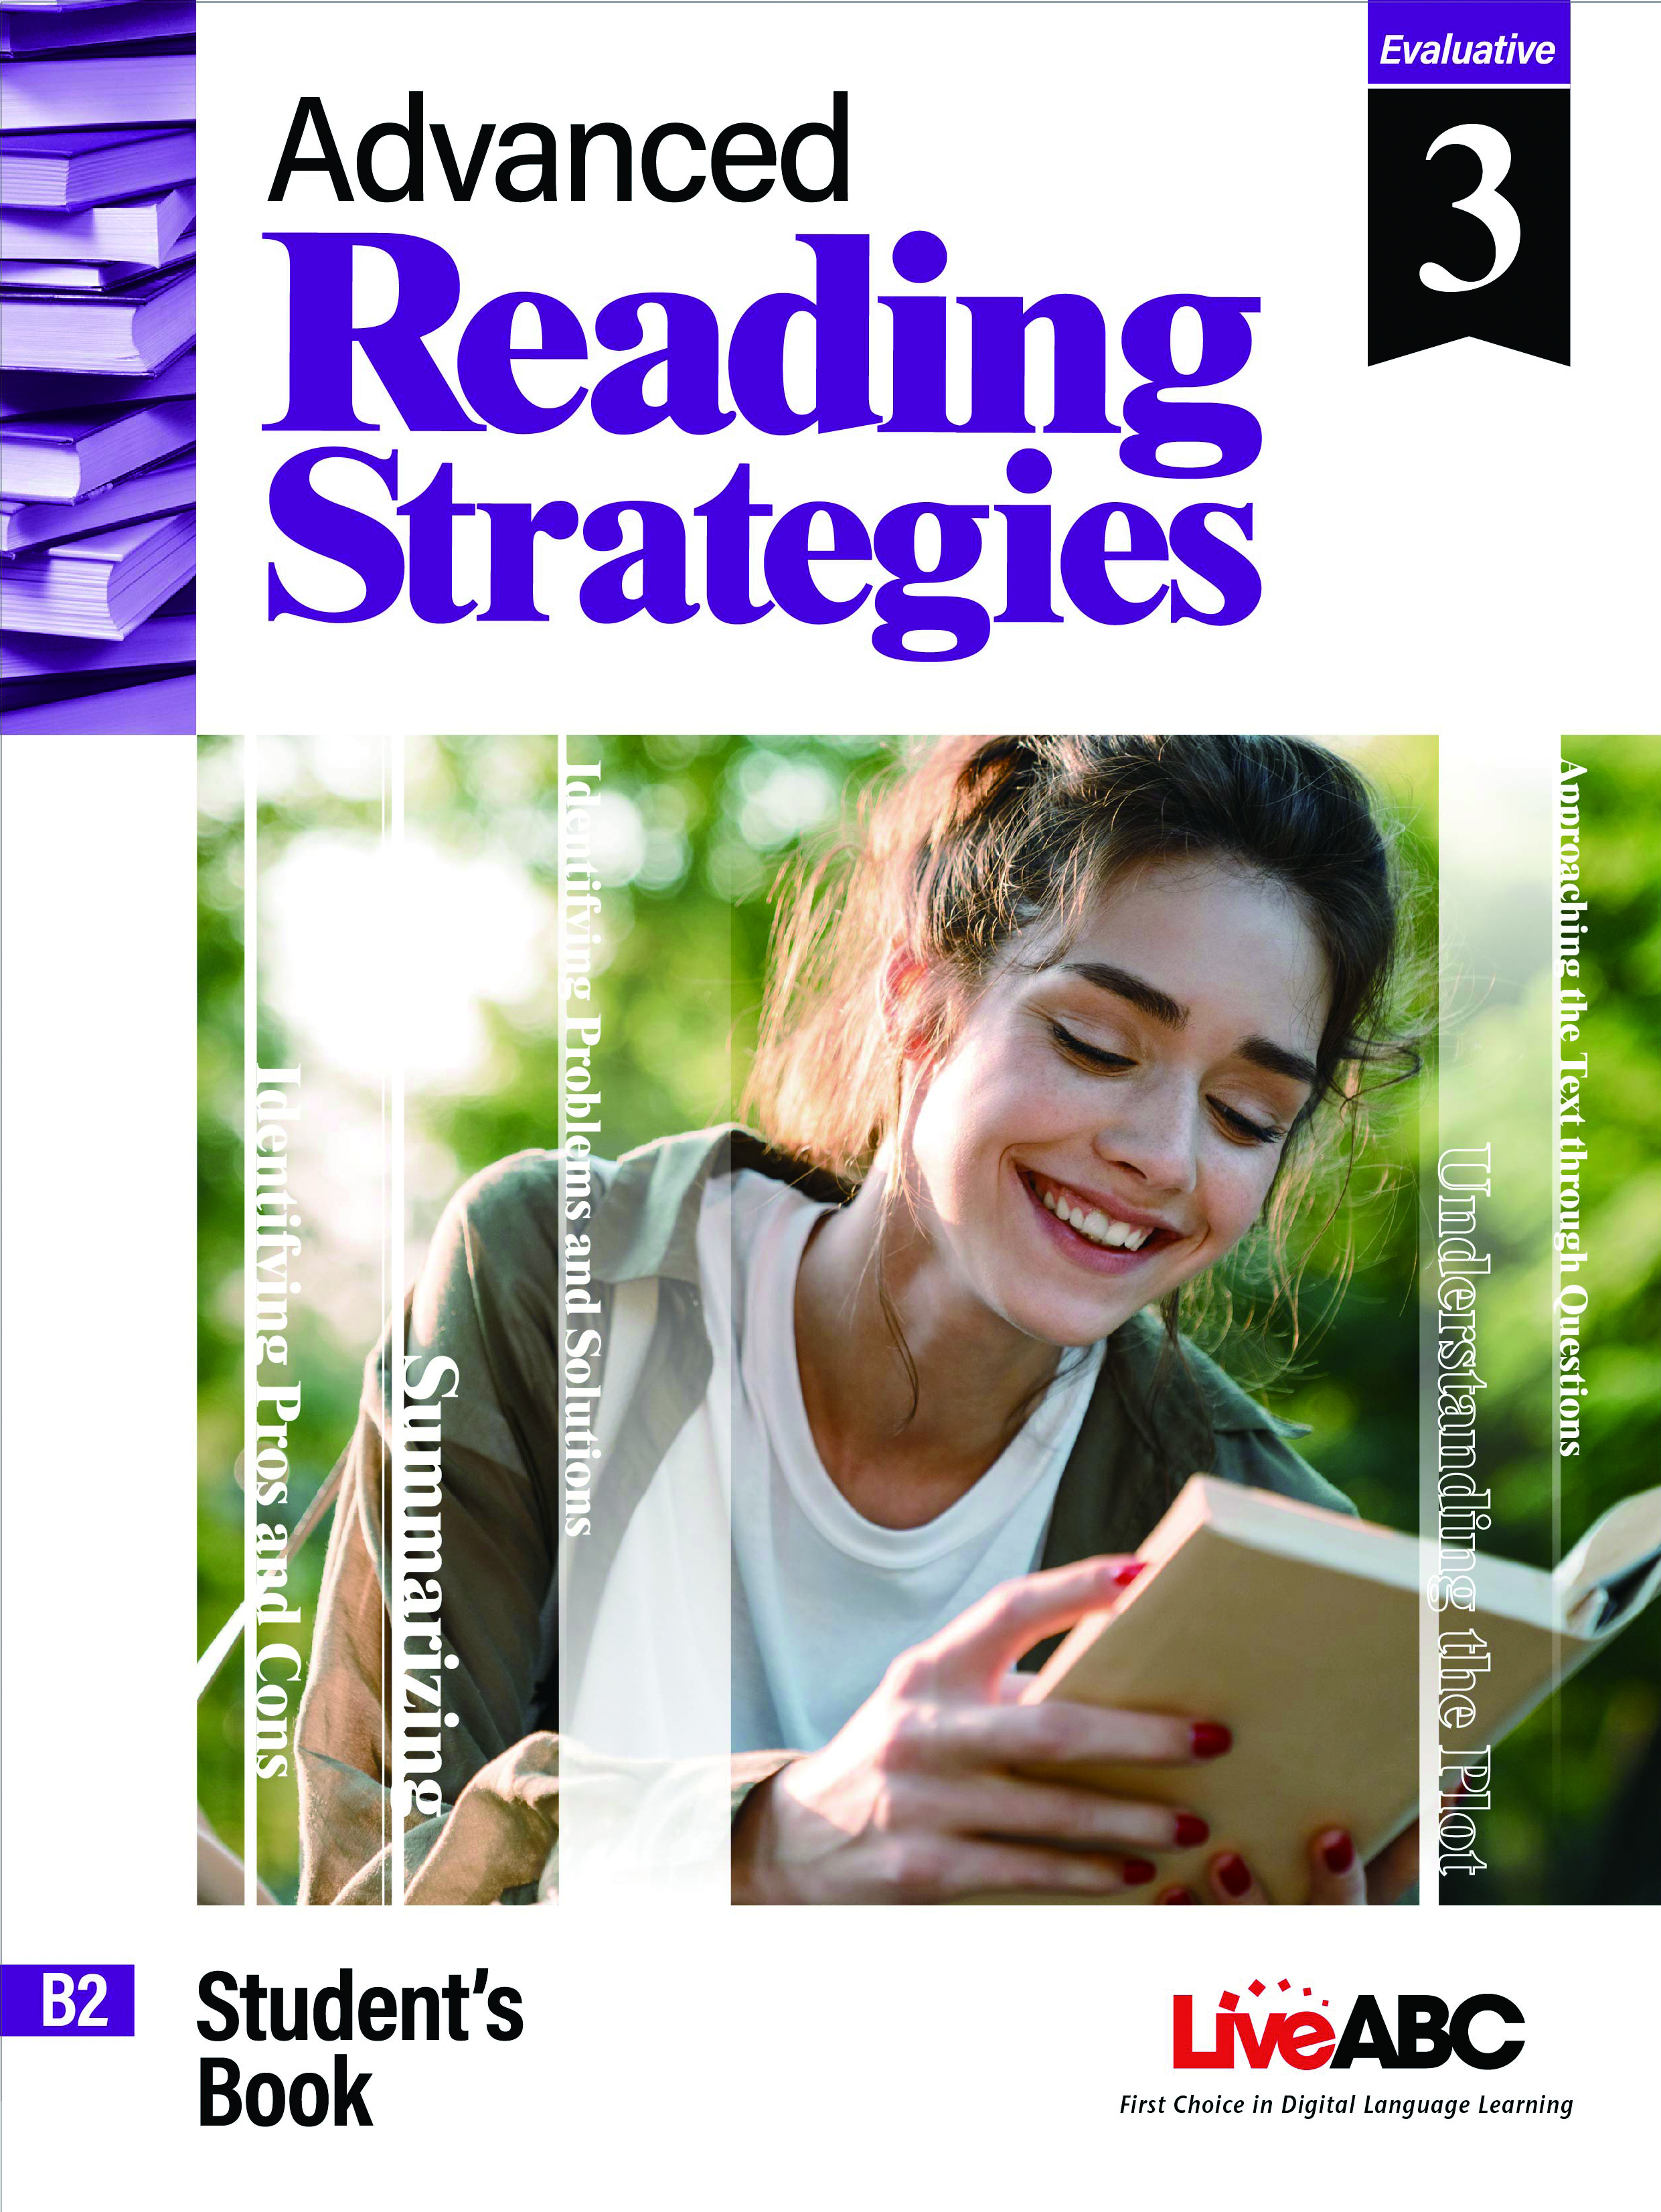 Advanced Reading Strategy SB cover B3 Coming soon